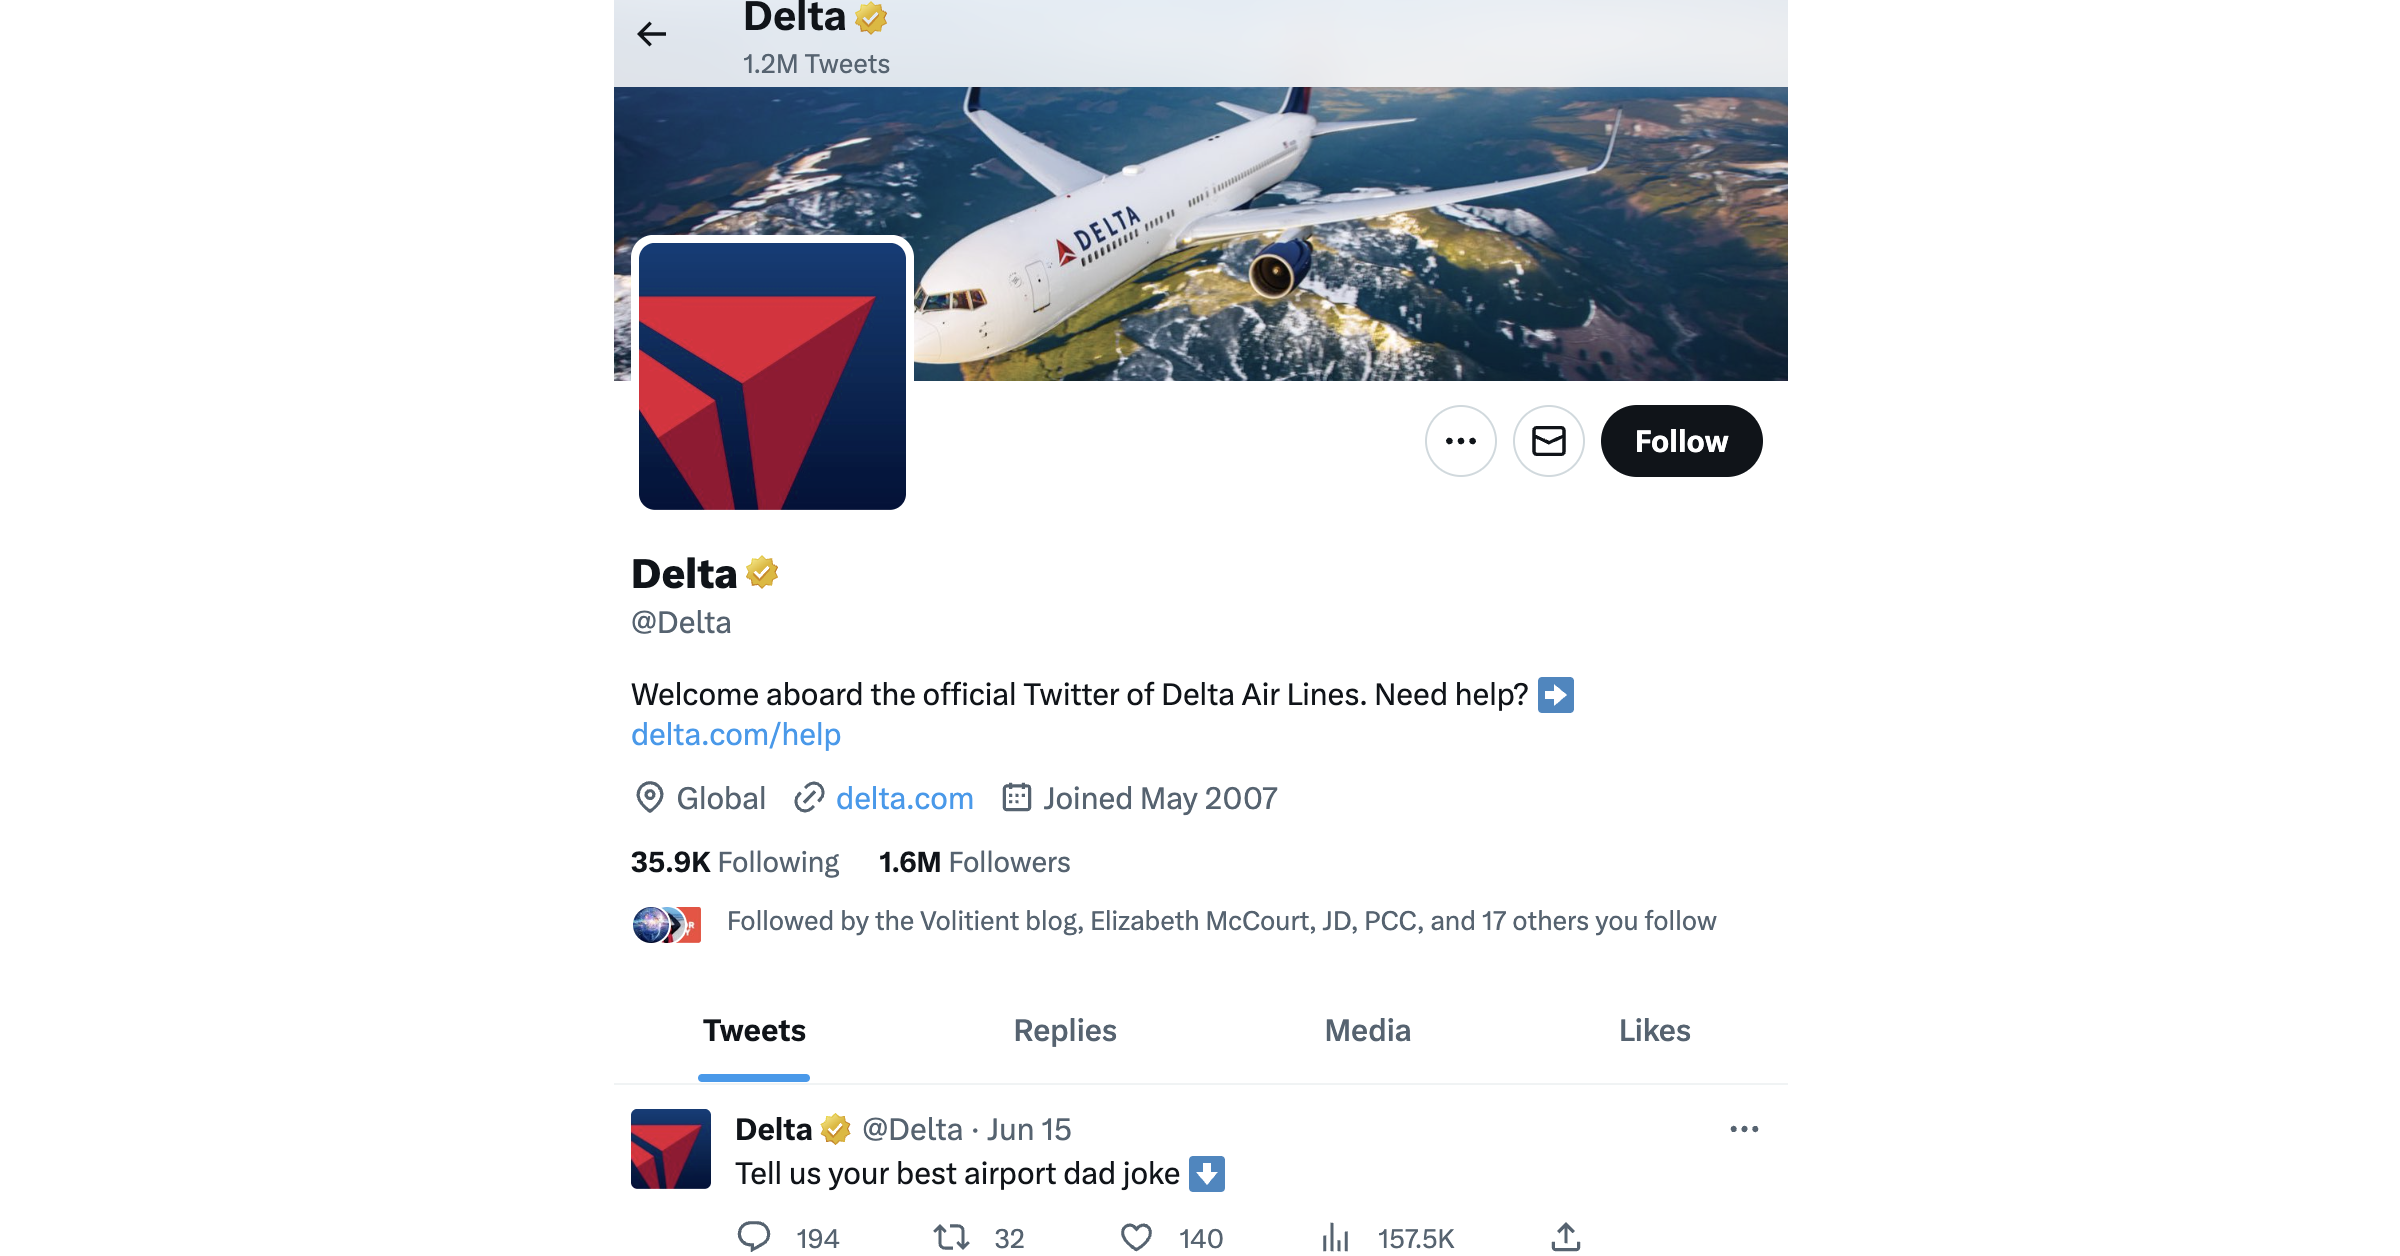 Delta has a solid presence on Twitter, and they keep their audience engaged and entertained with relevant tweets - customer retention for airlines